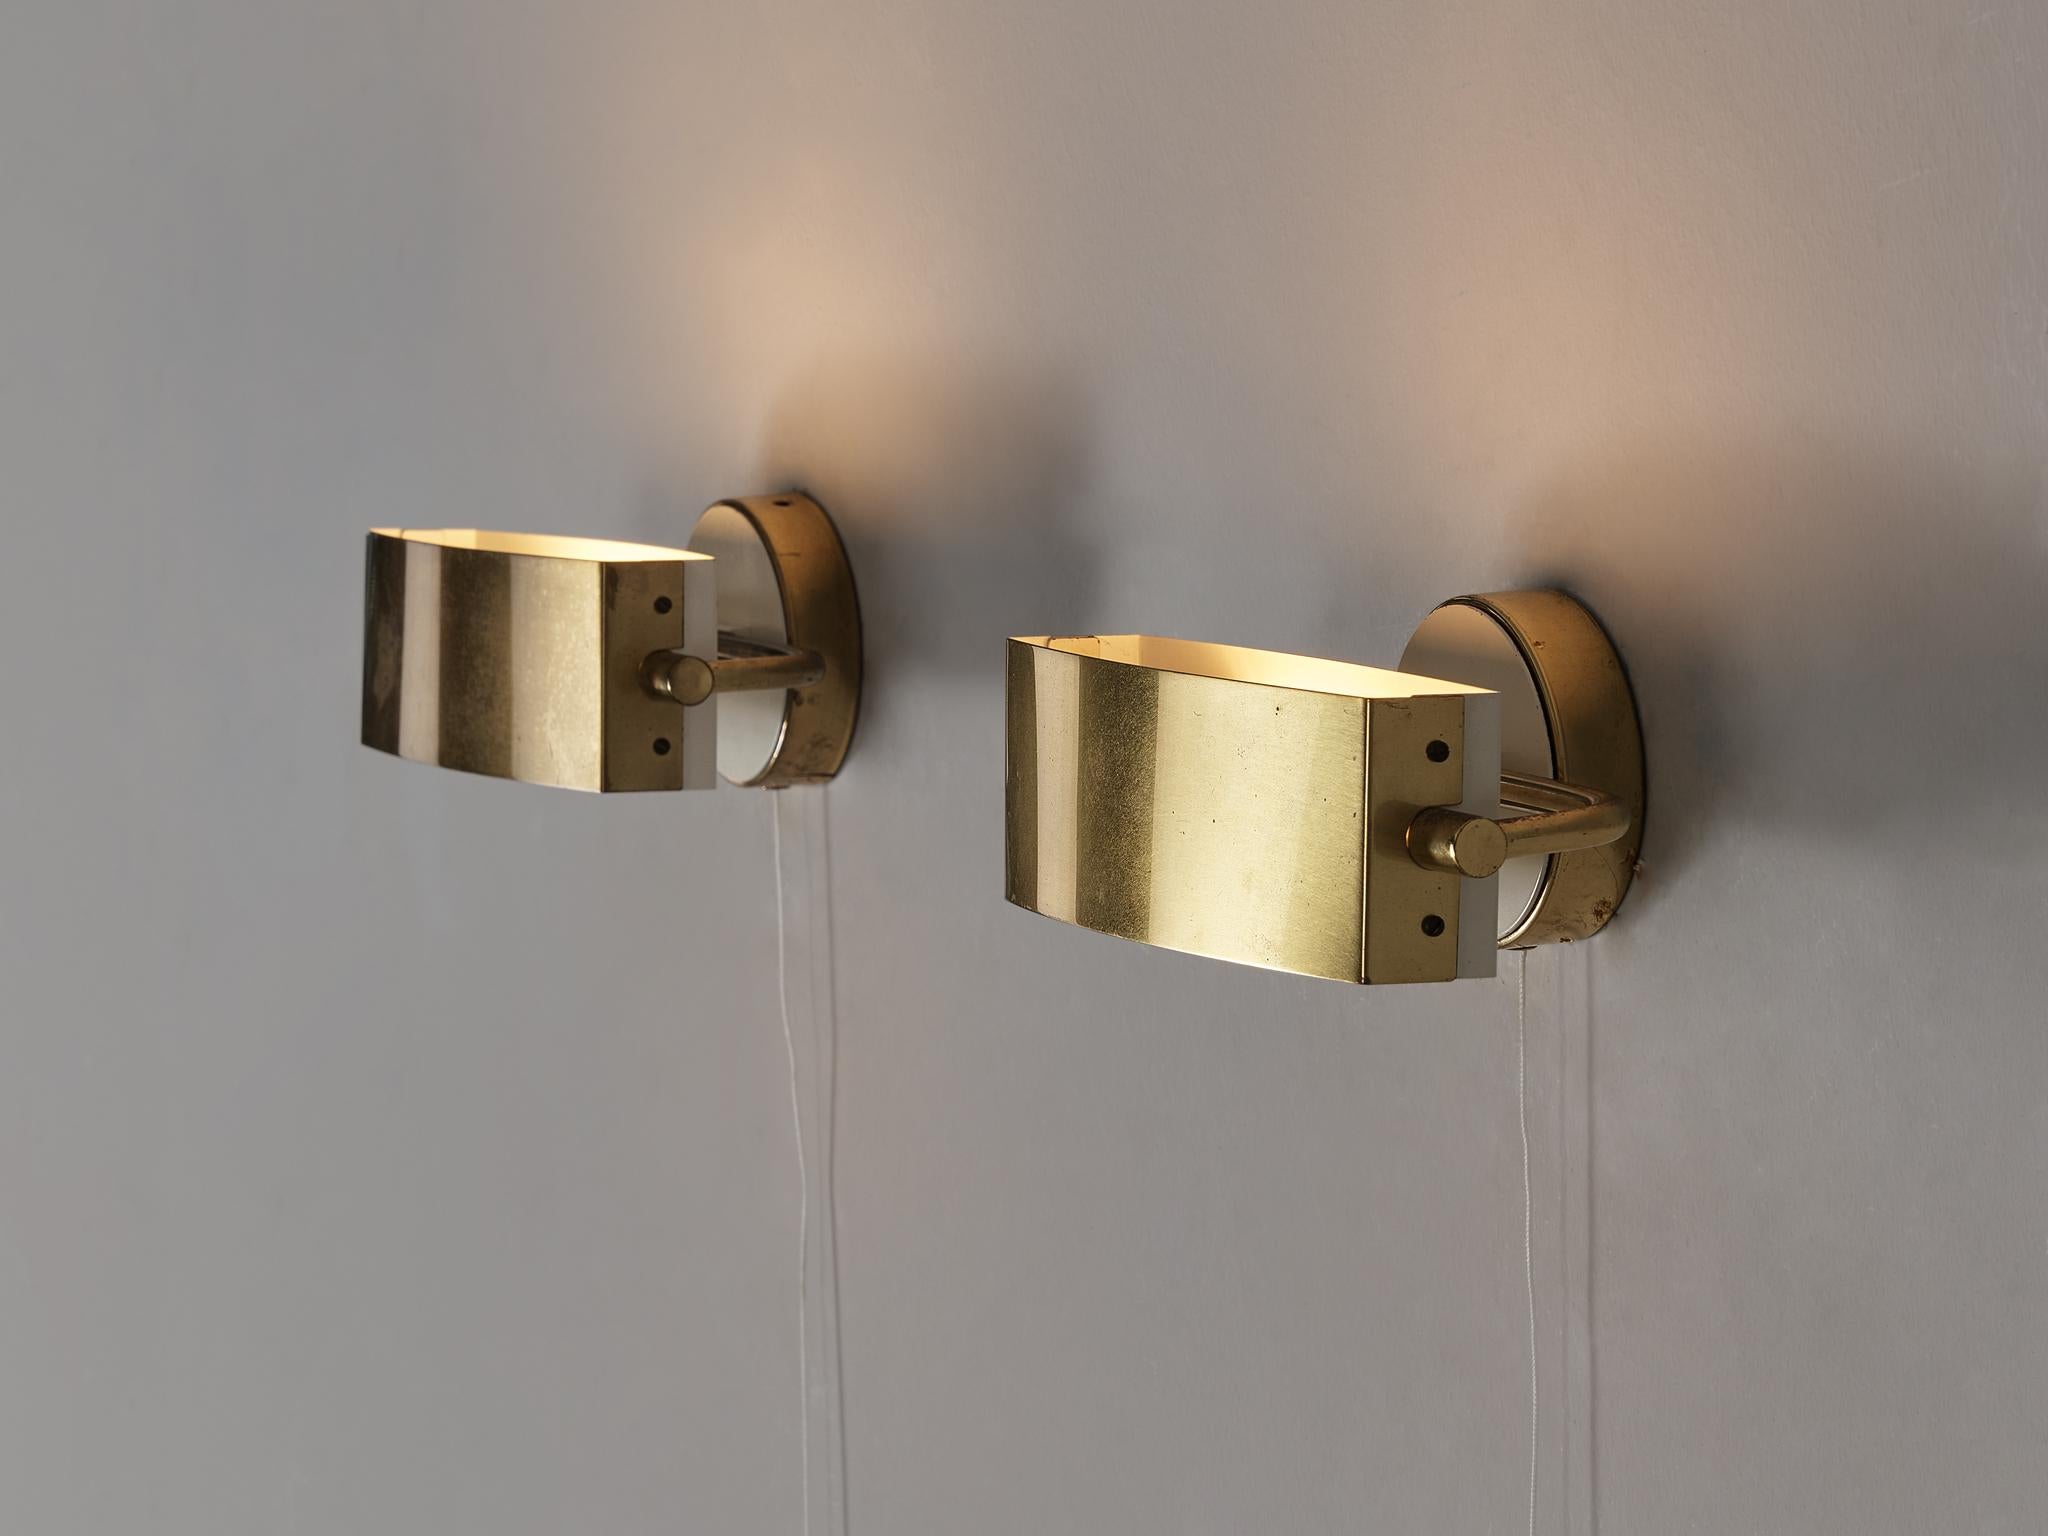 Wall lights, brass, coated aluminum, coated steel, France, 1950s

These exquisite French wall lamps showcase a delicate aesthetic executed within a simple layout. The interplay of brass and white elements gives these sconces a luxurious appearance.